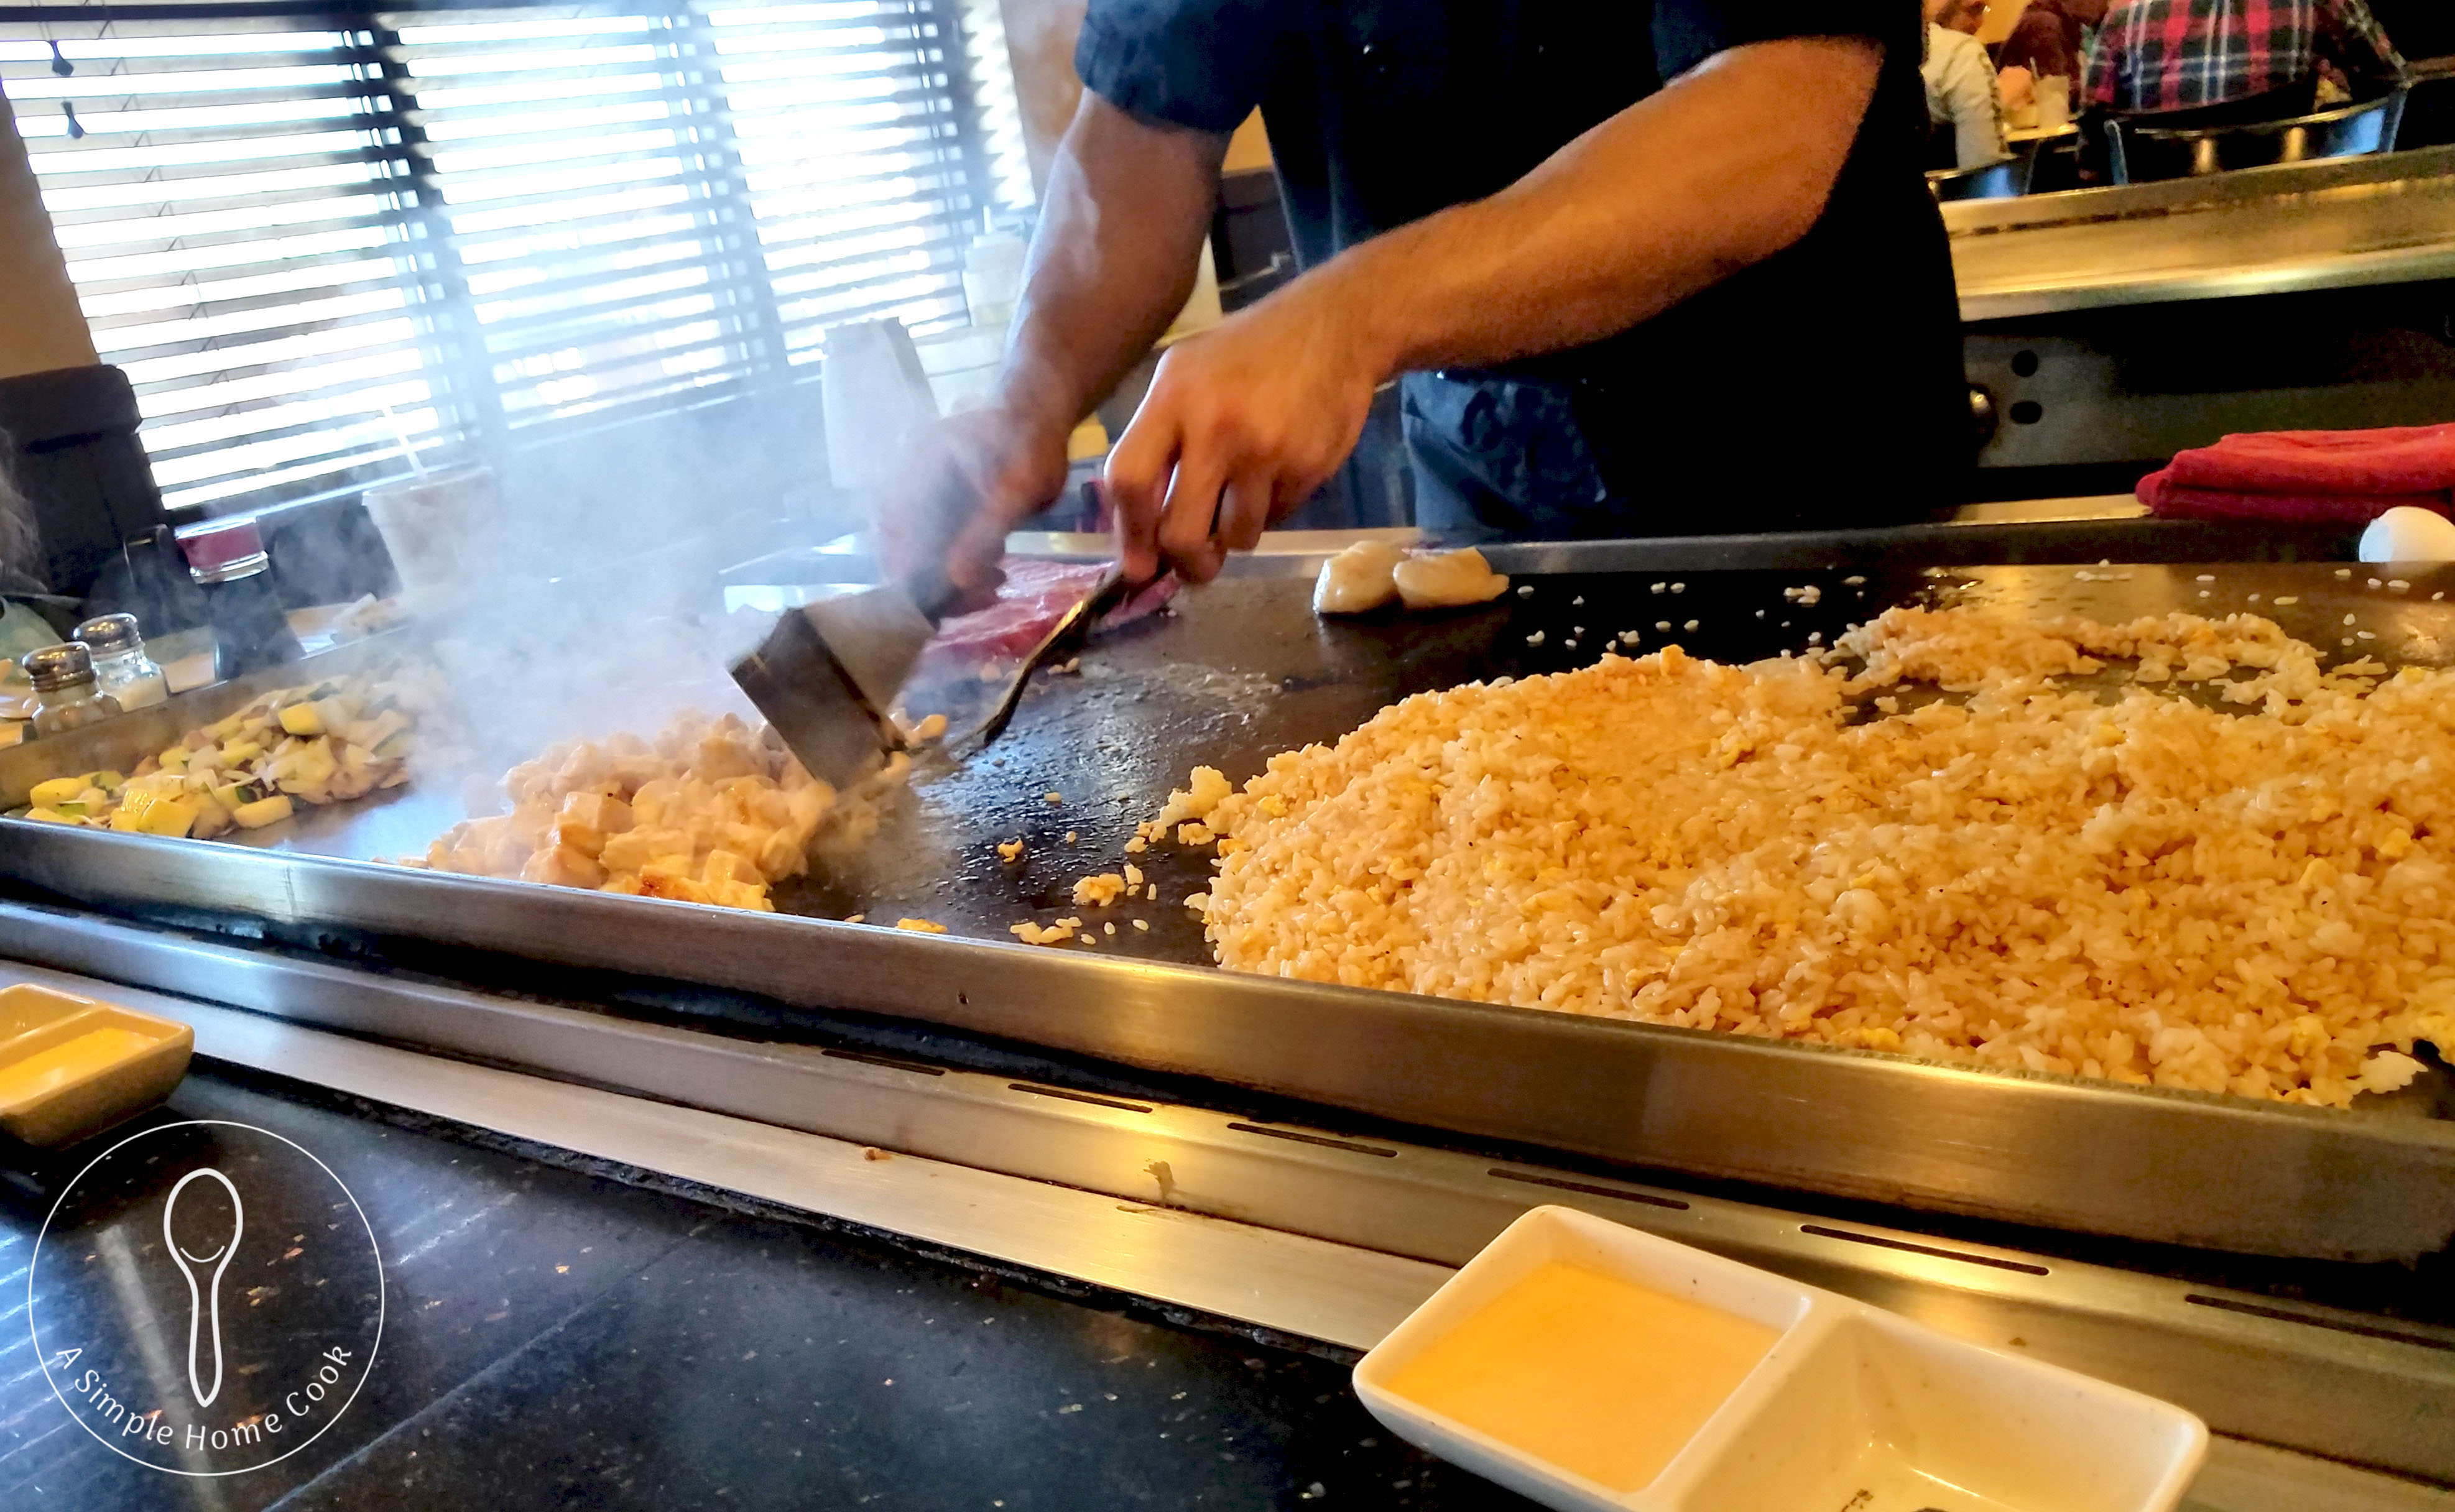 hibachi grill with rice